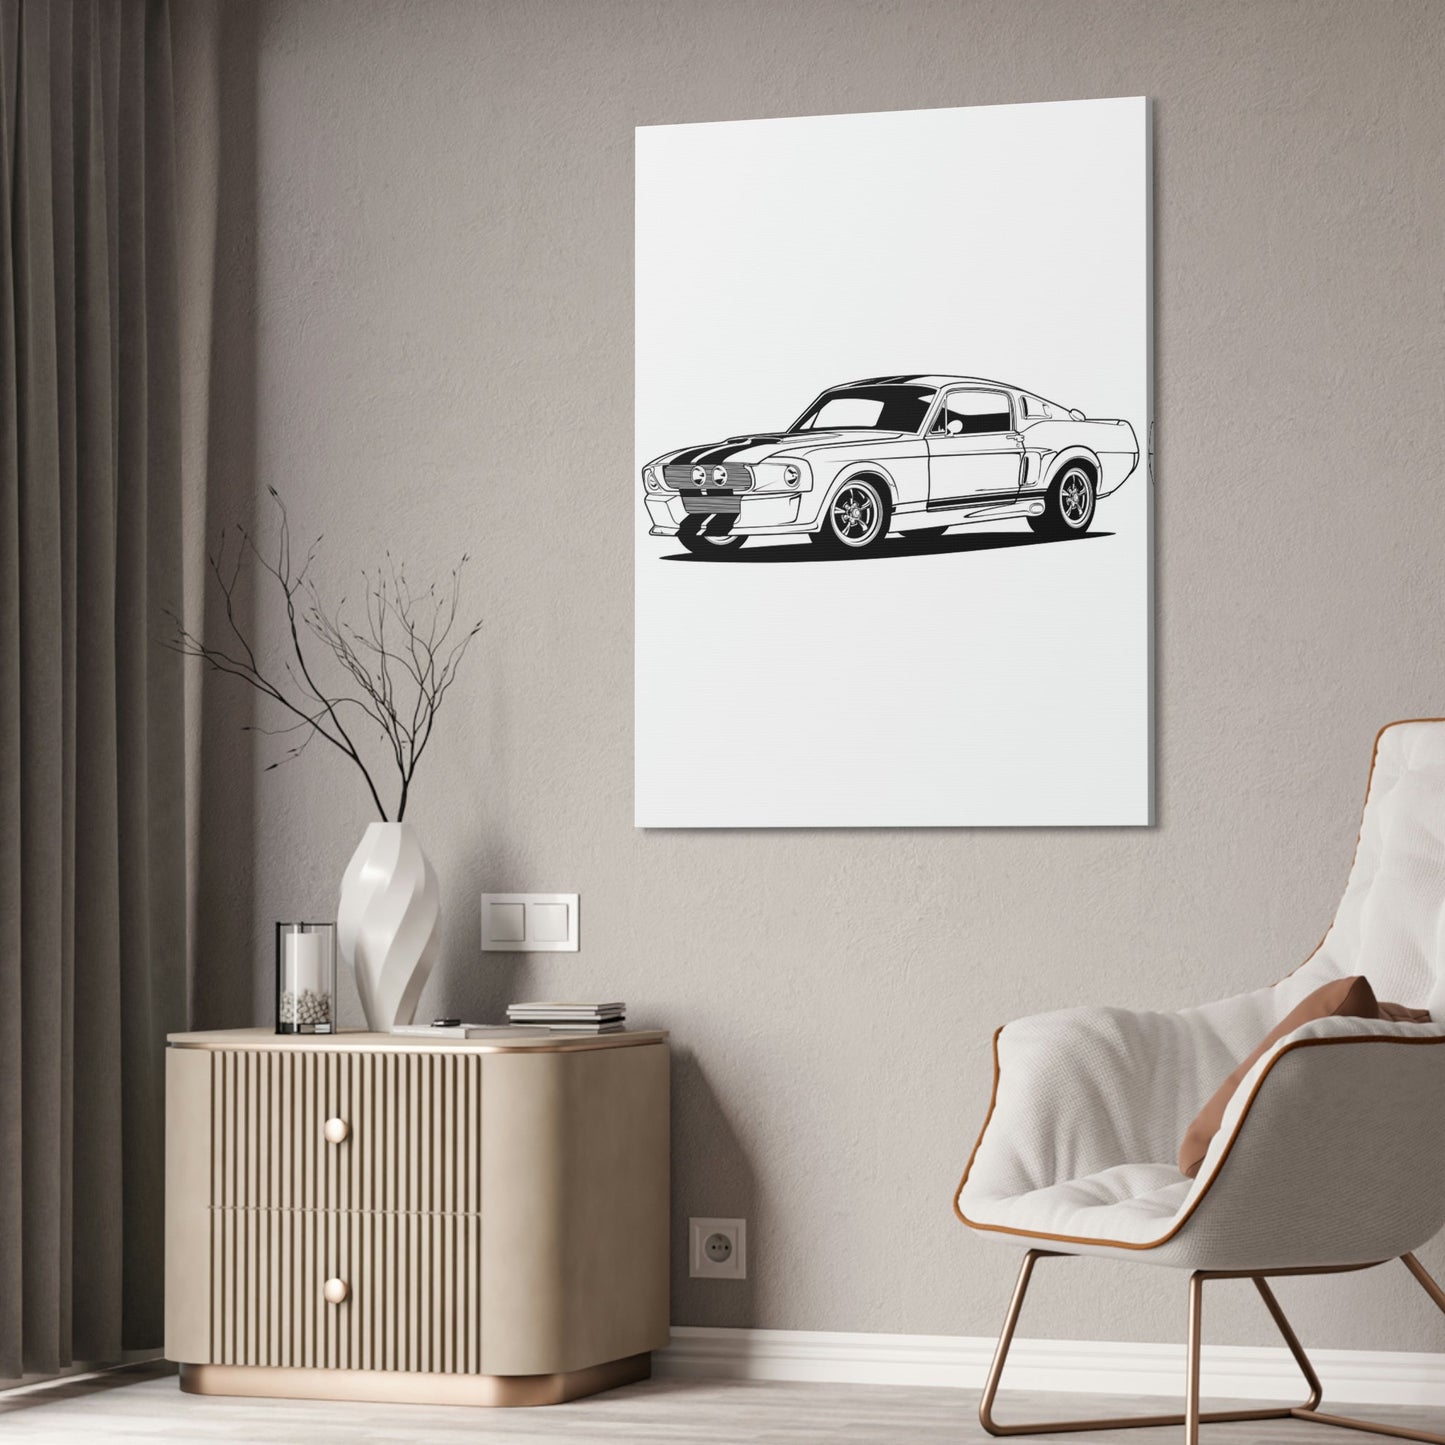 Thrill of the Ride: Framed Canvas Poster of a Mustang Sports Car for Automotive Art Connoisseurs